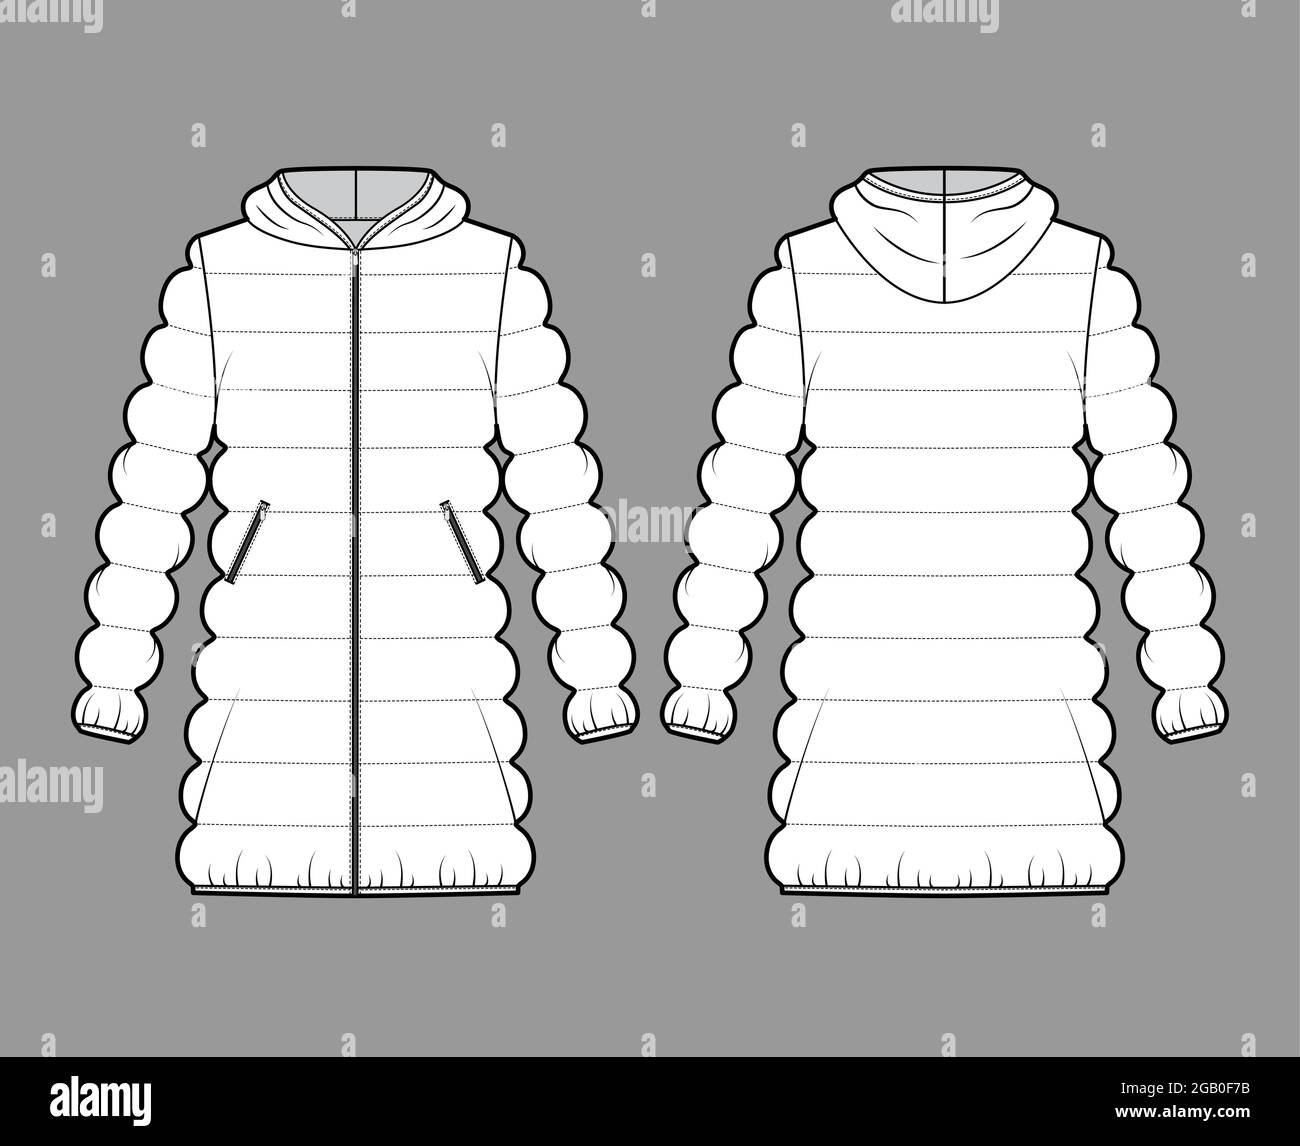 Hooded jacket Down puffer coat technical fashion illustration with zip ...